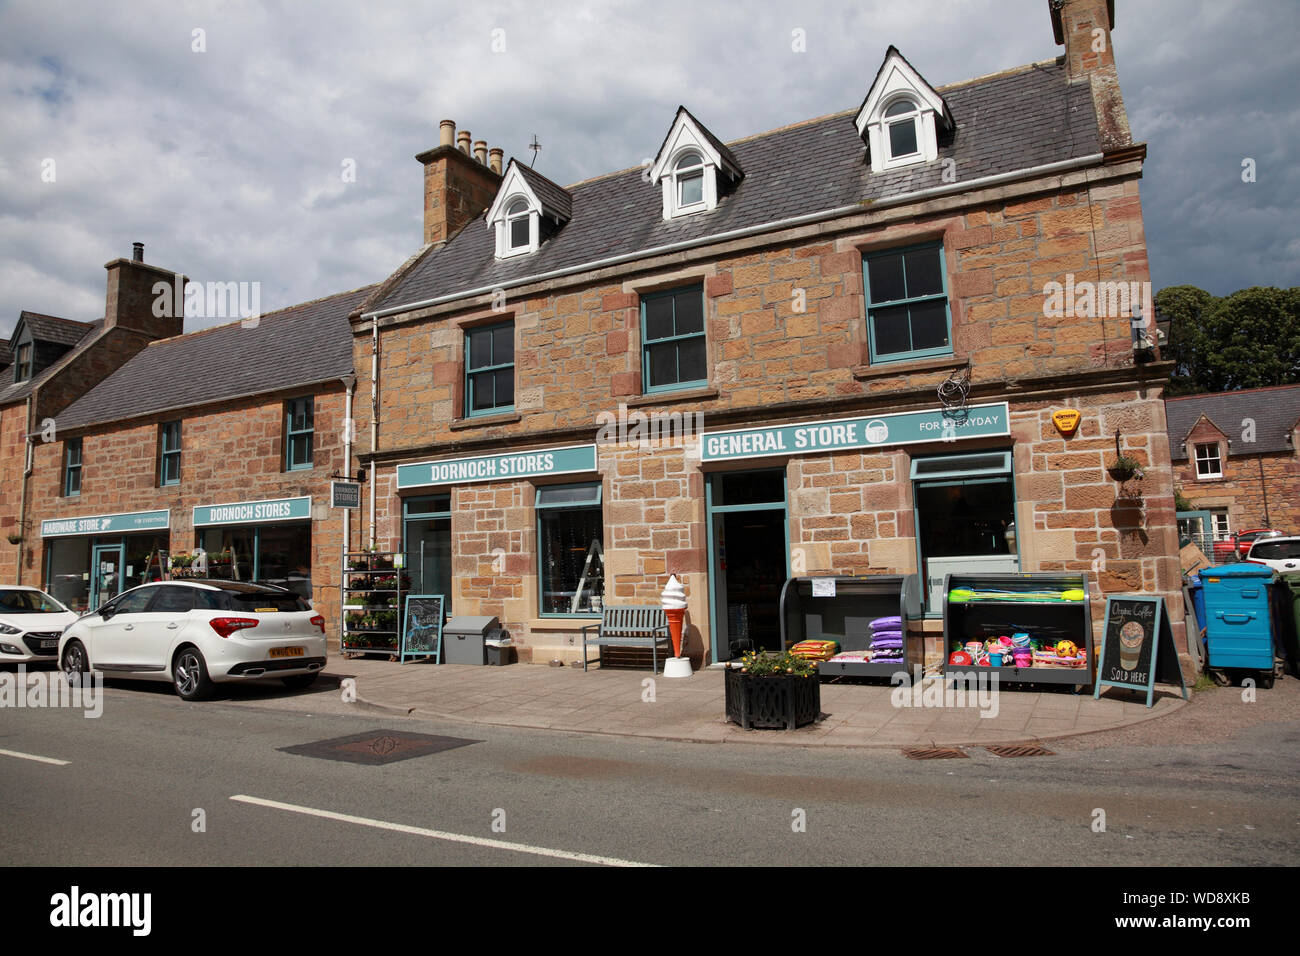 The General Store at Dornoch, a town in Sutherland, Highland, on the north east coast of Scotland Stock Photo